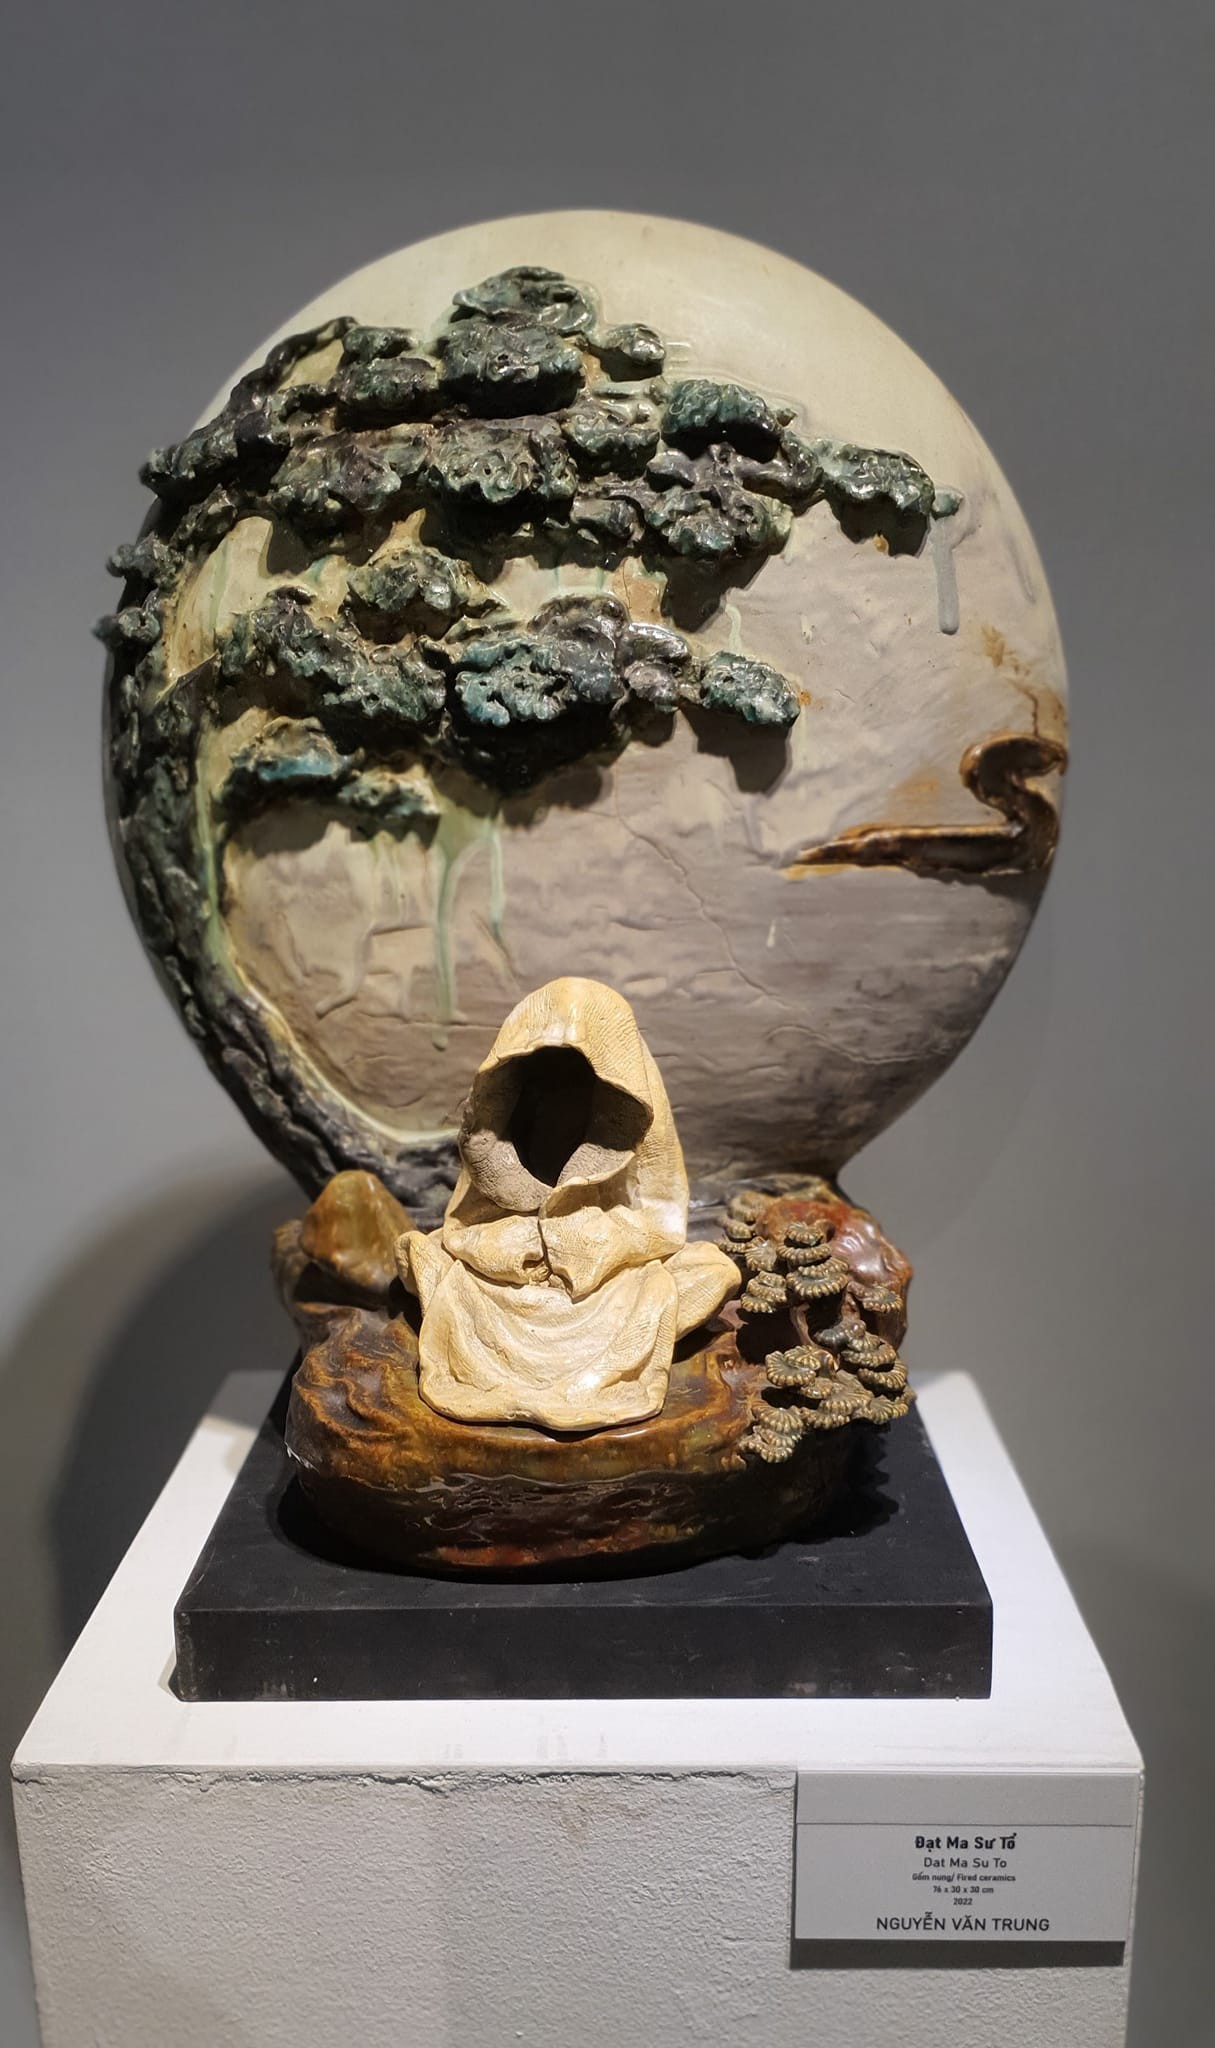 Exhibition Helps Connect Vietnamese, Indonesian Artists